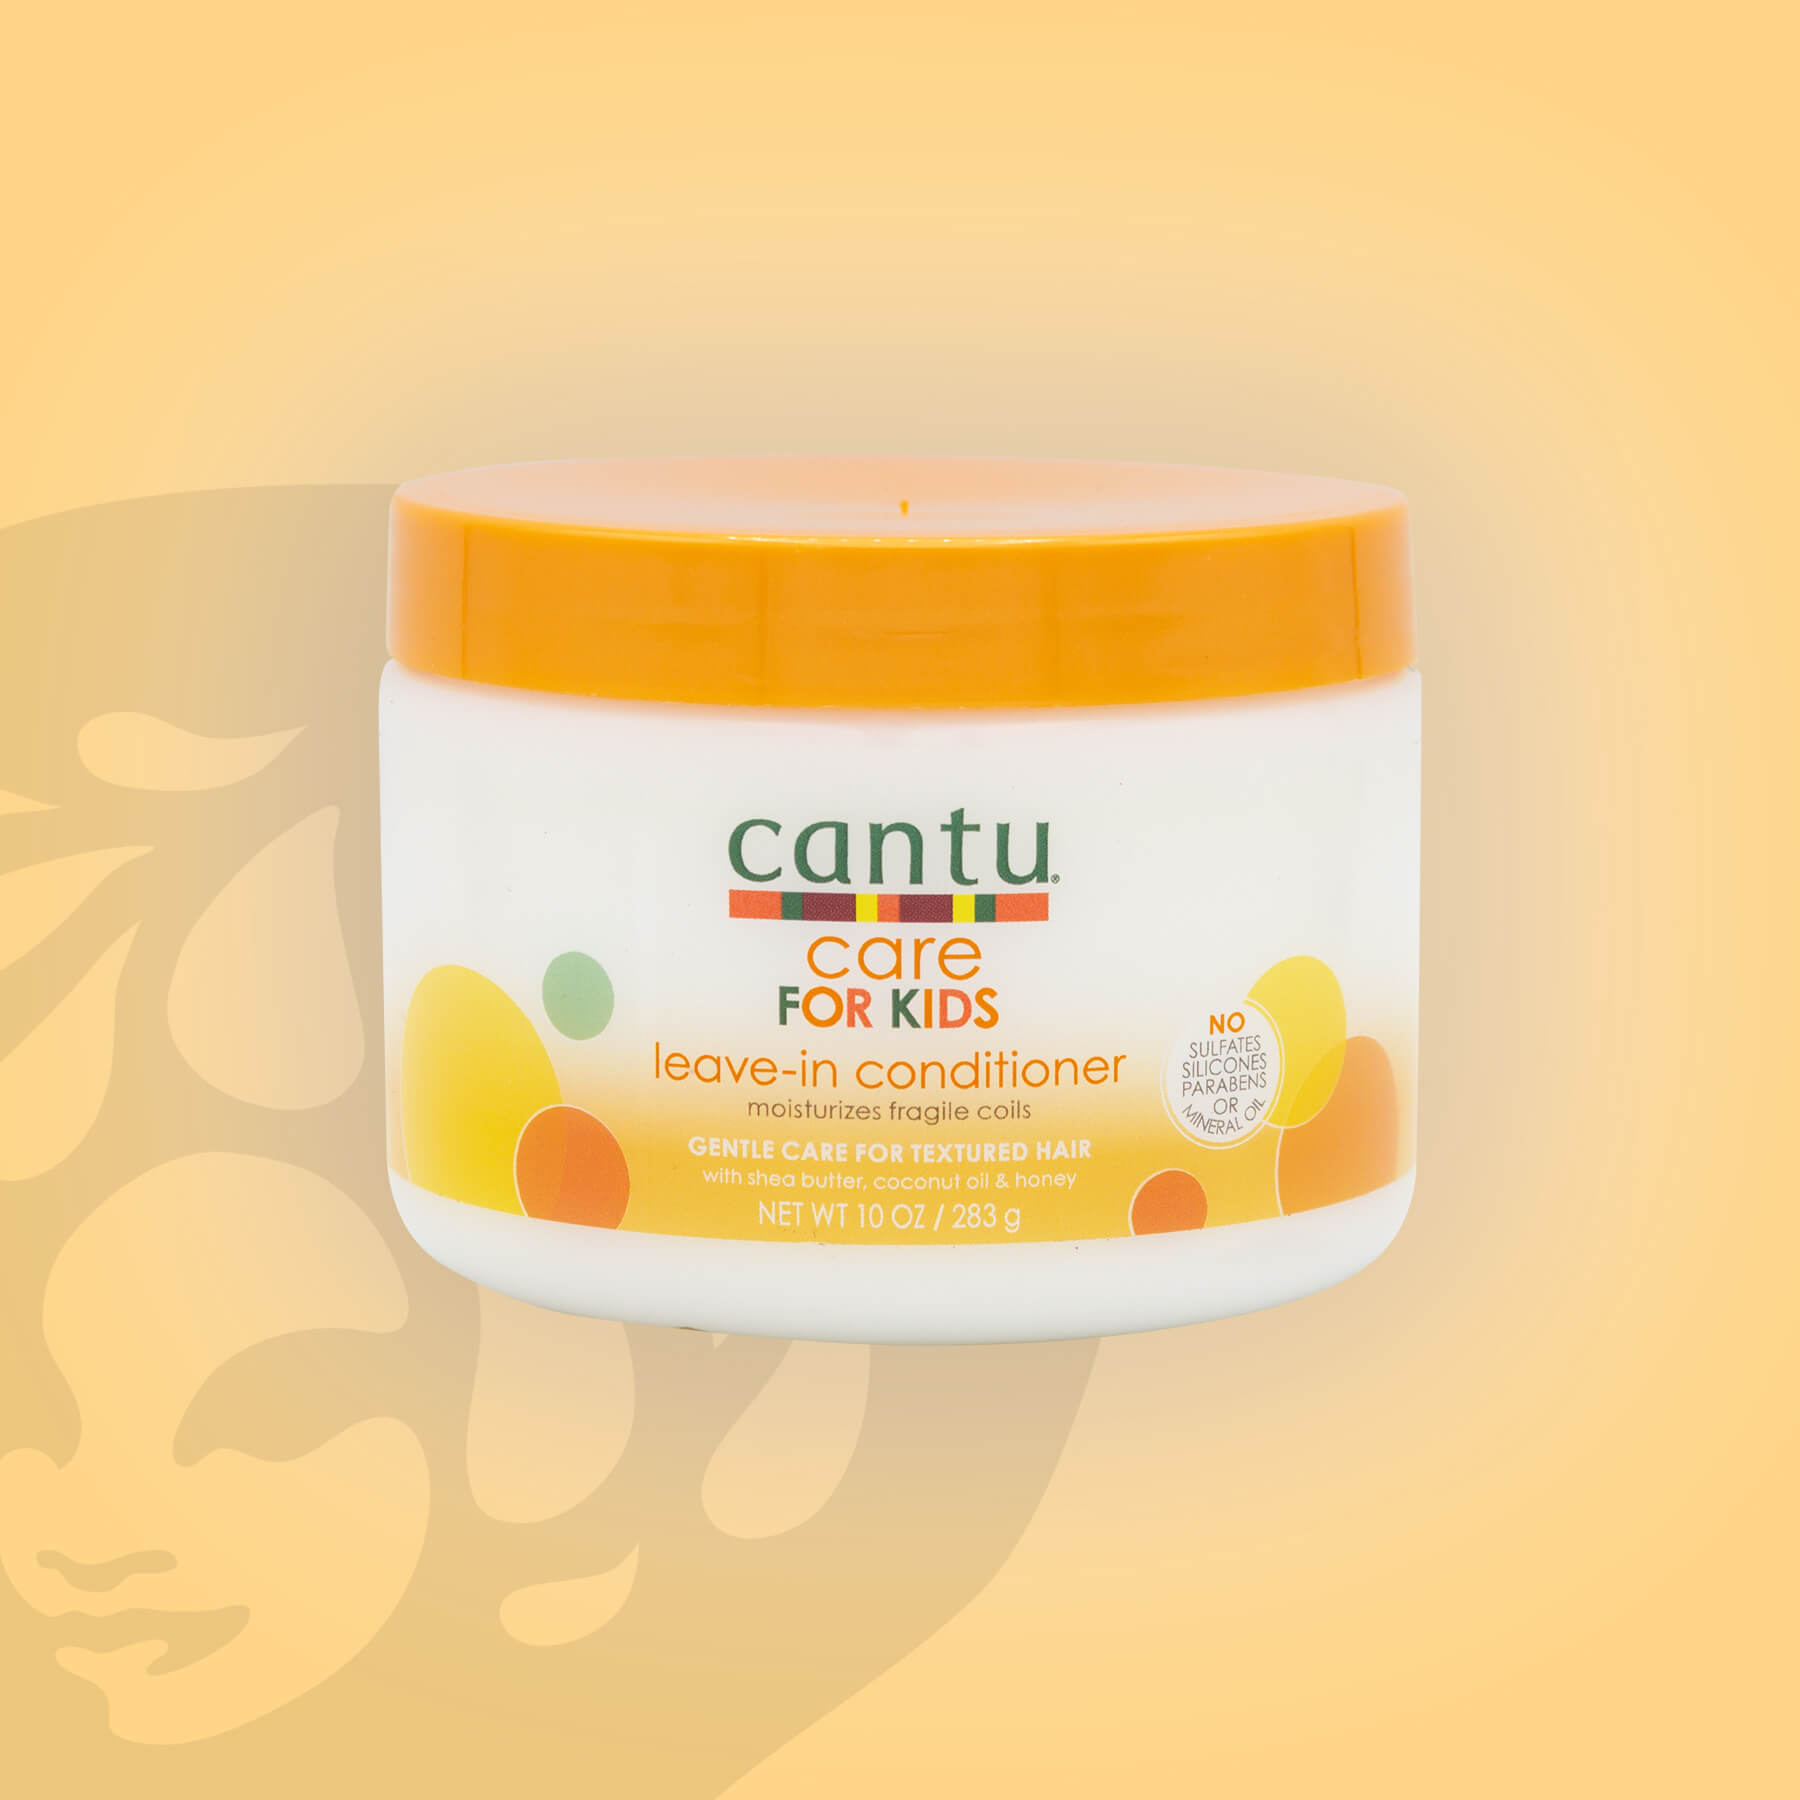 Cantu Care for Kids: Leave-In Conditioner 10 oz